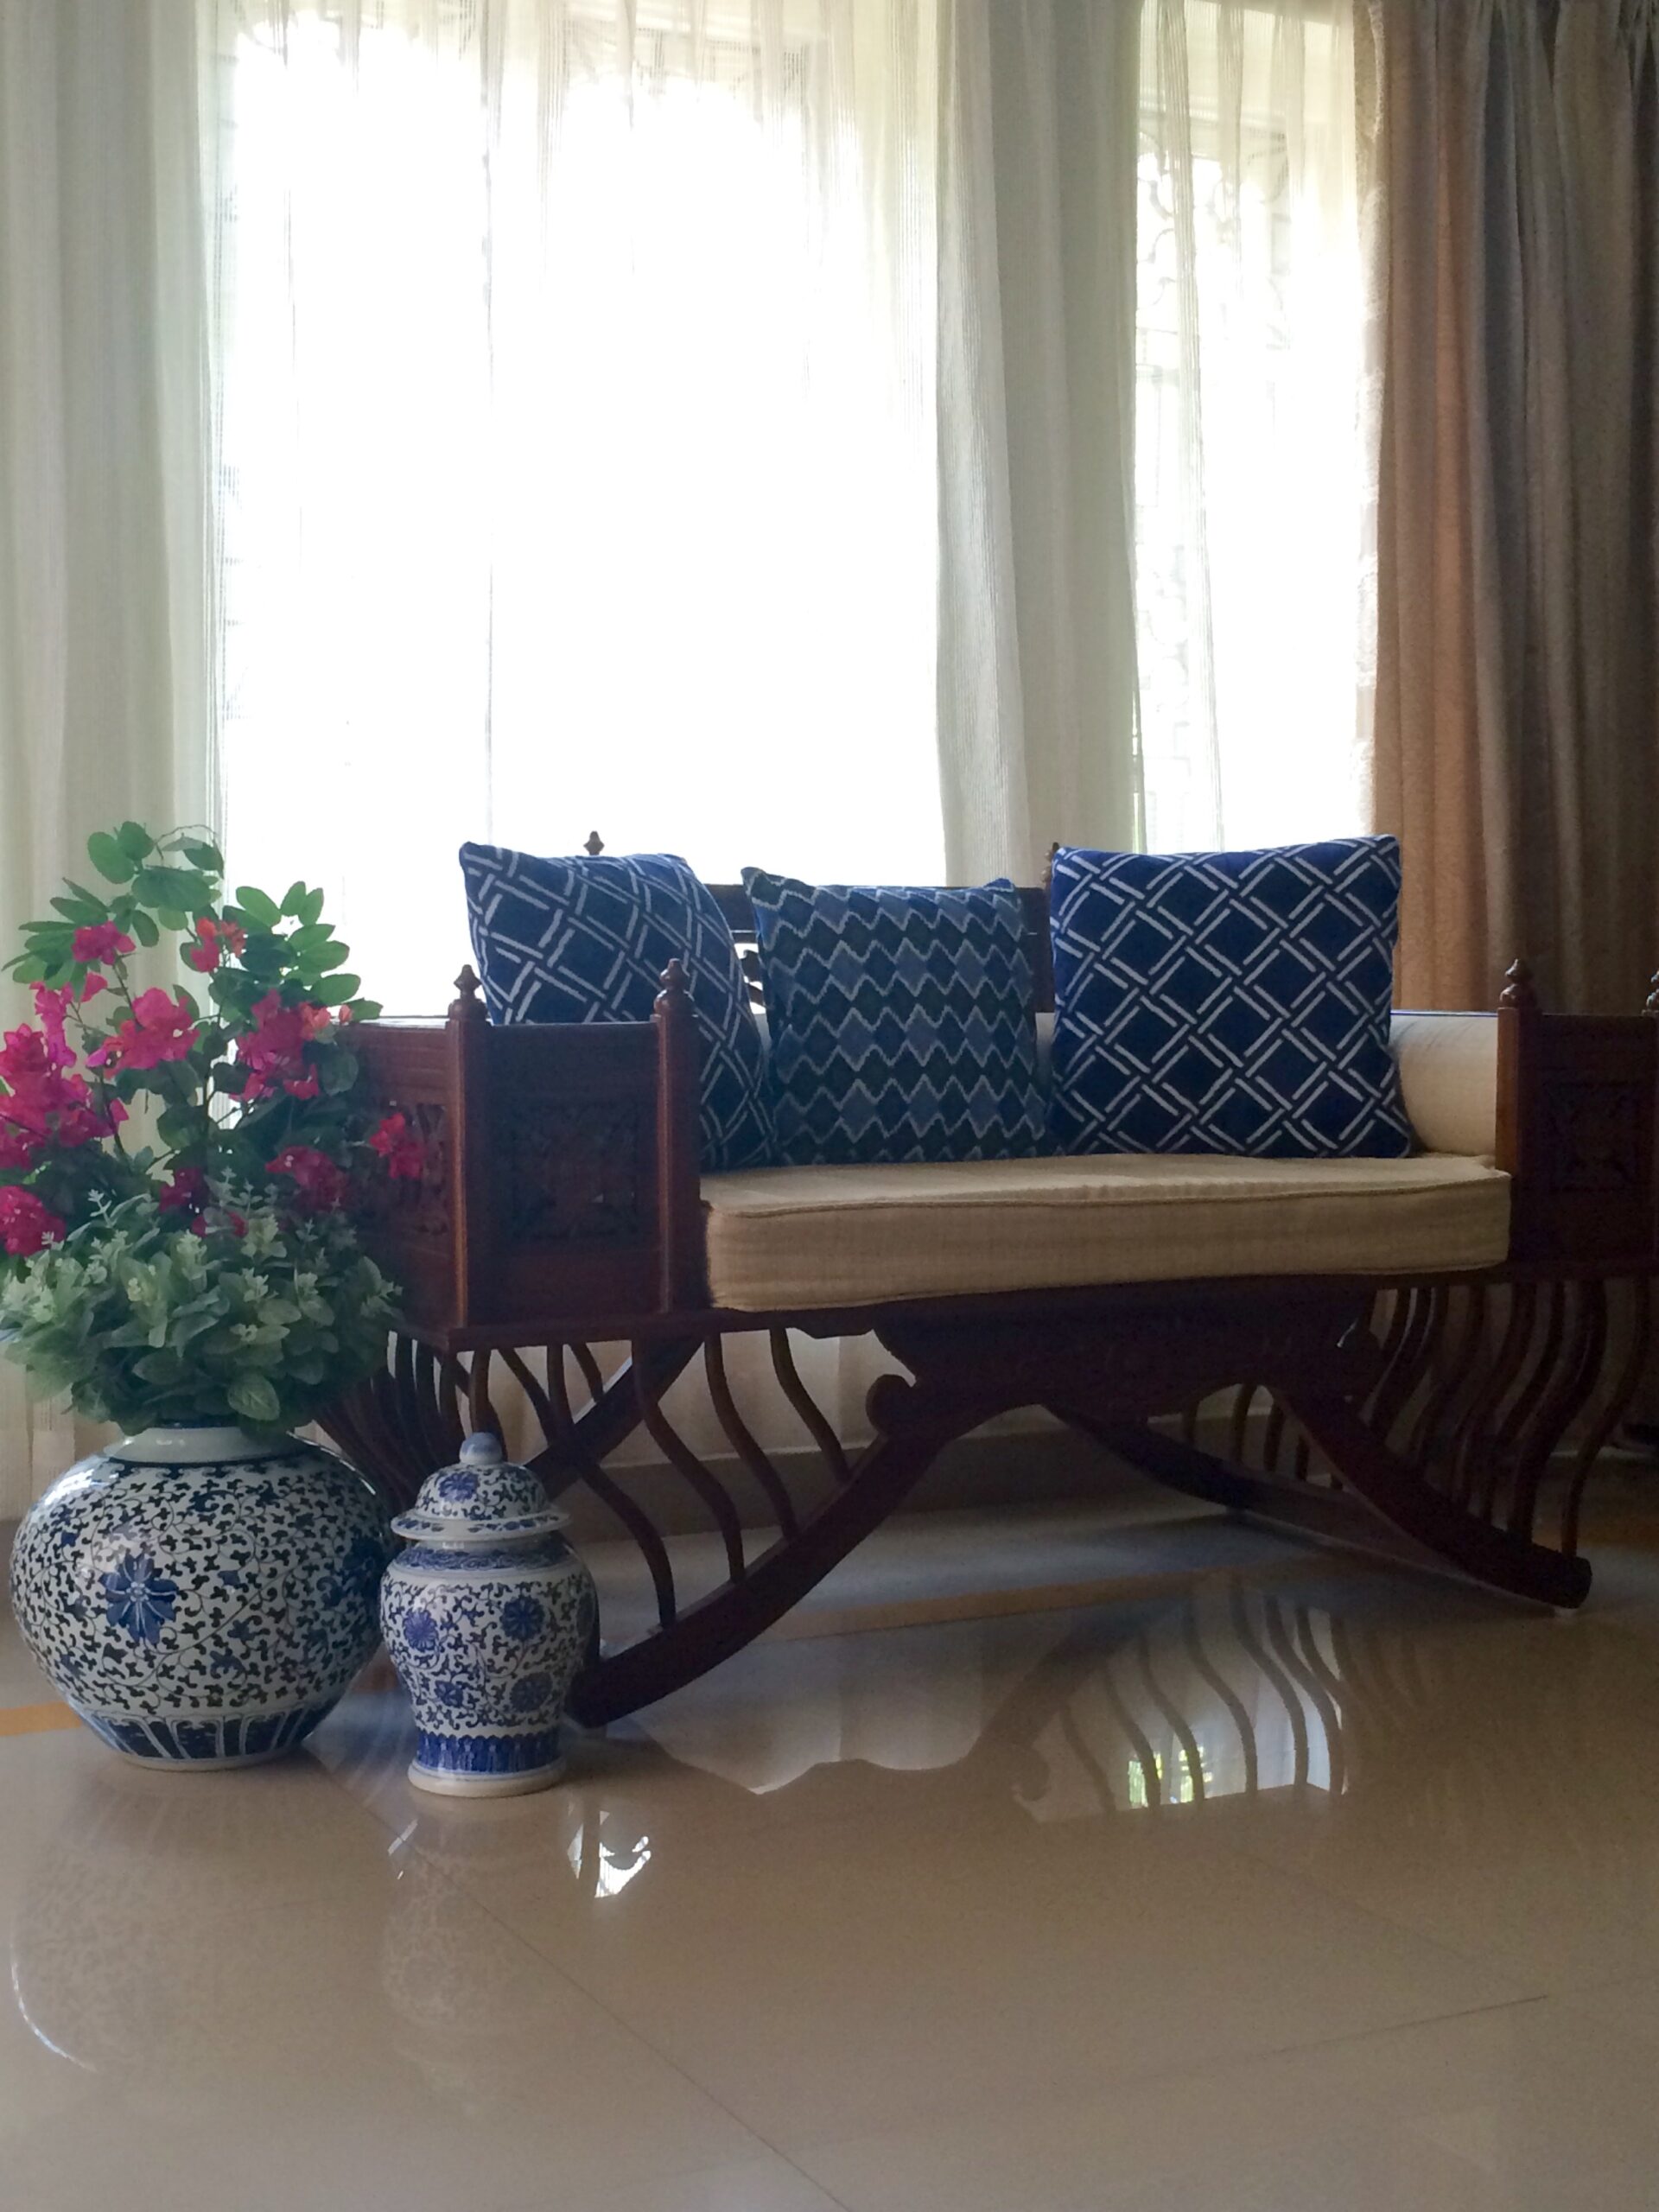 An elephant chair, jaipuri blue pottery and the pink bougainvillea add color to this foyer area | Joseph home tour